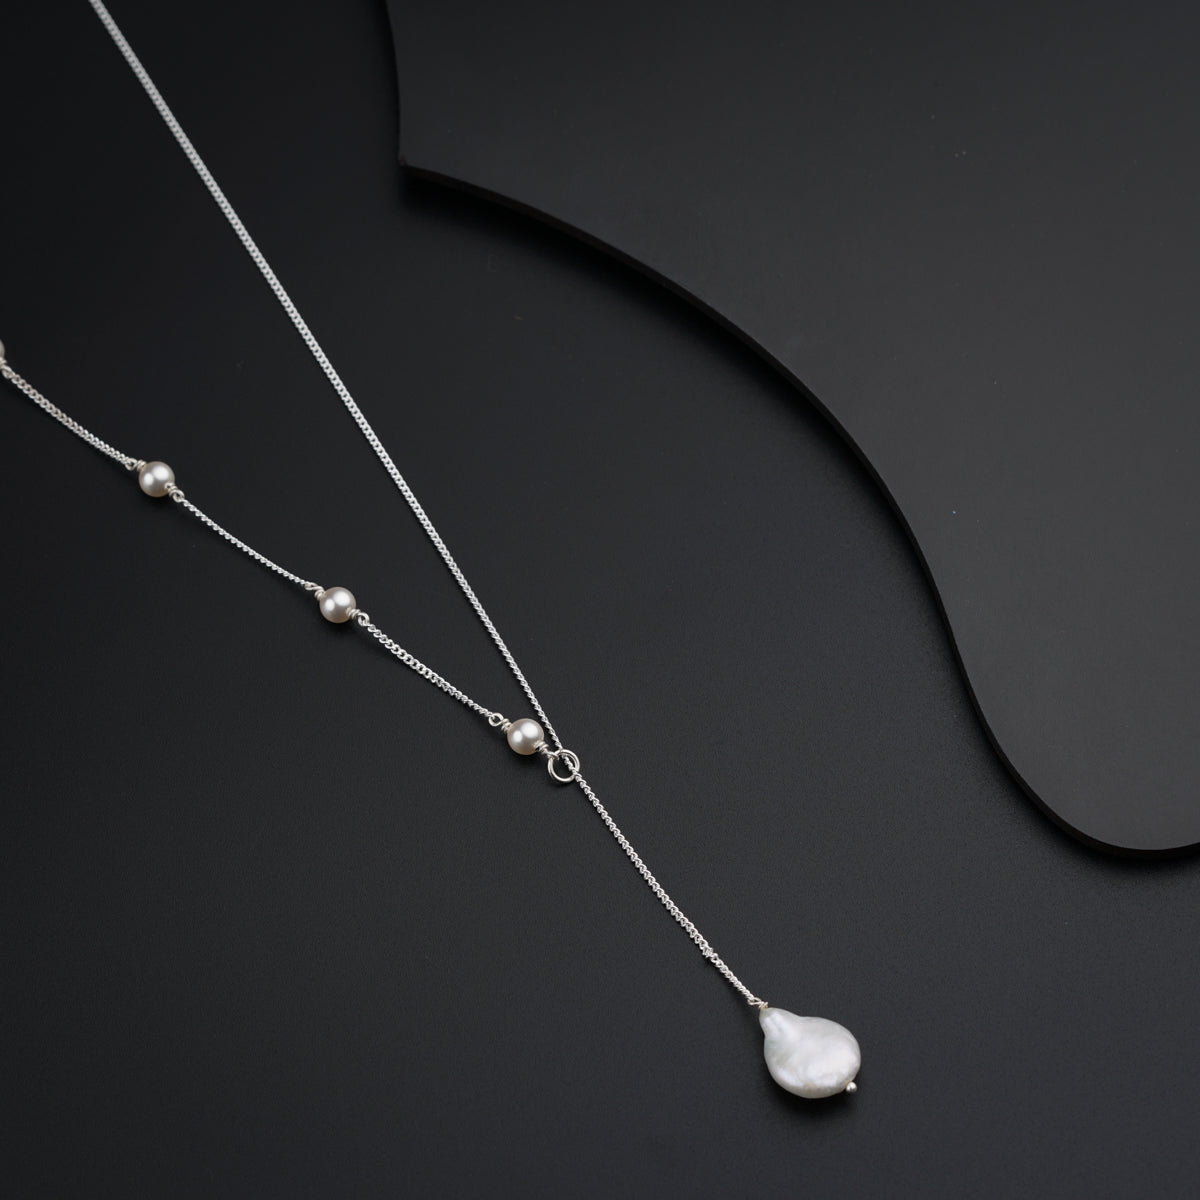 a necklace with a white pearl on a black background